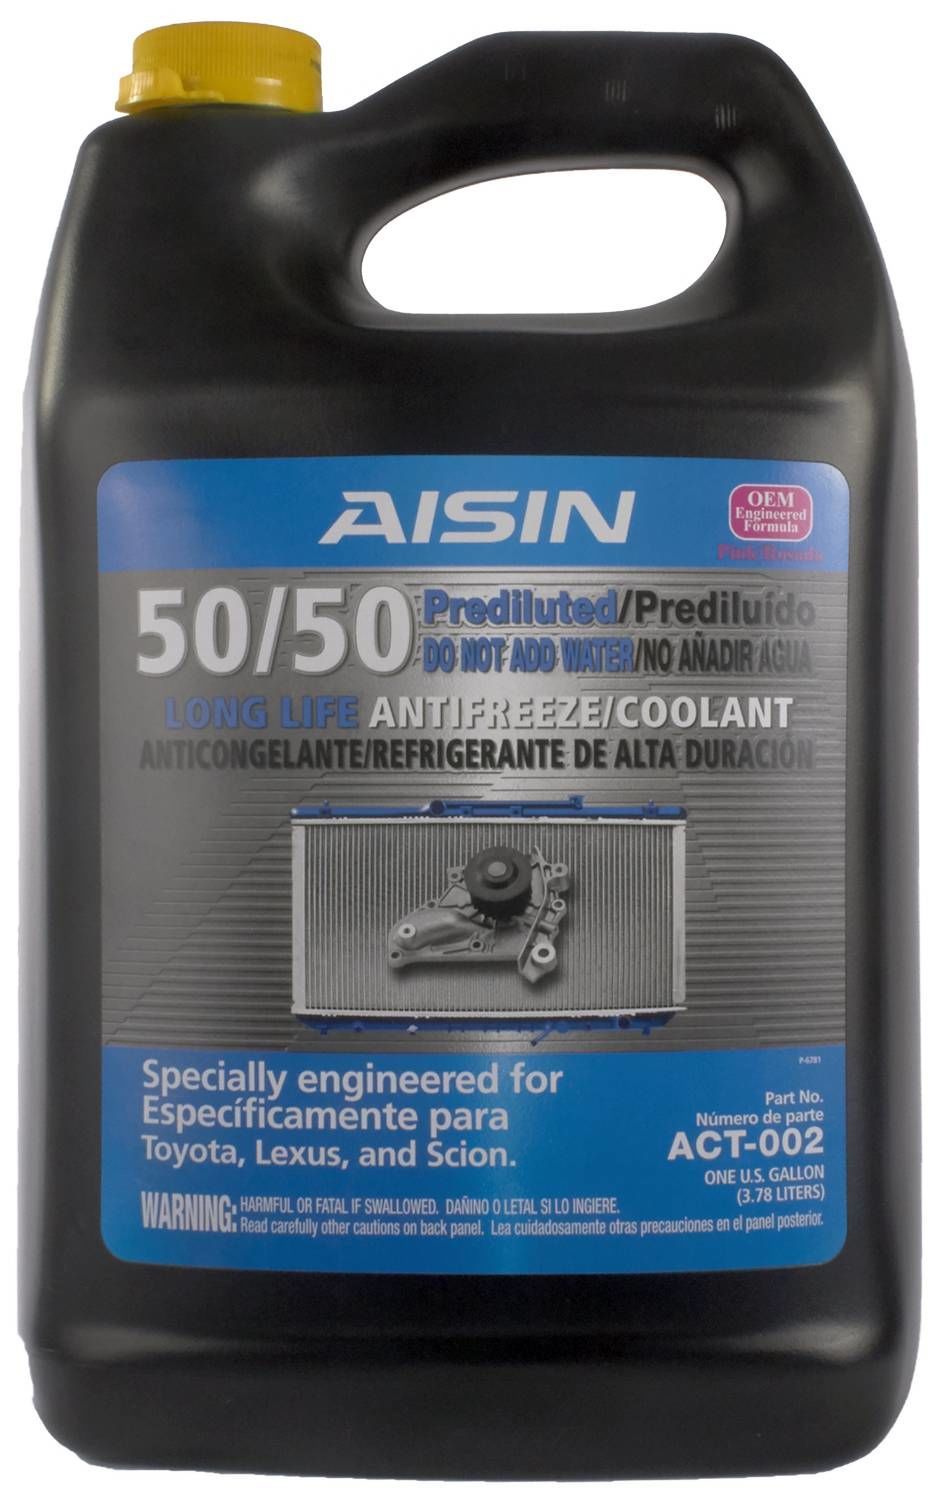 AISIN WORLD CORP. OF AMERICA - AISIN Vehicle Specific Coolant / Antifreeze - AIS ACT-002